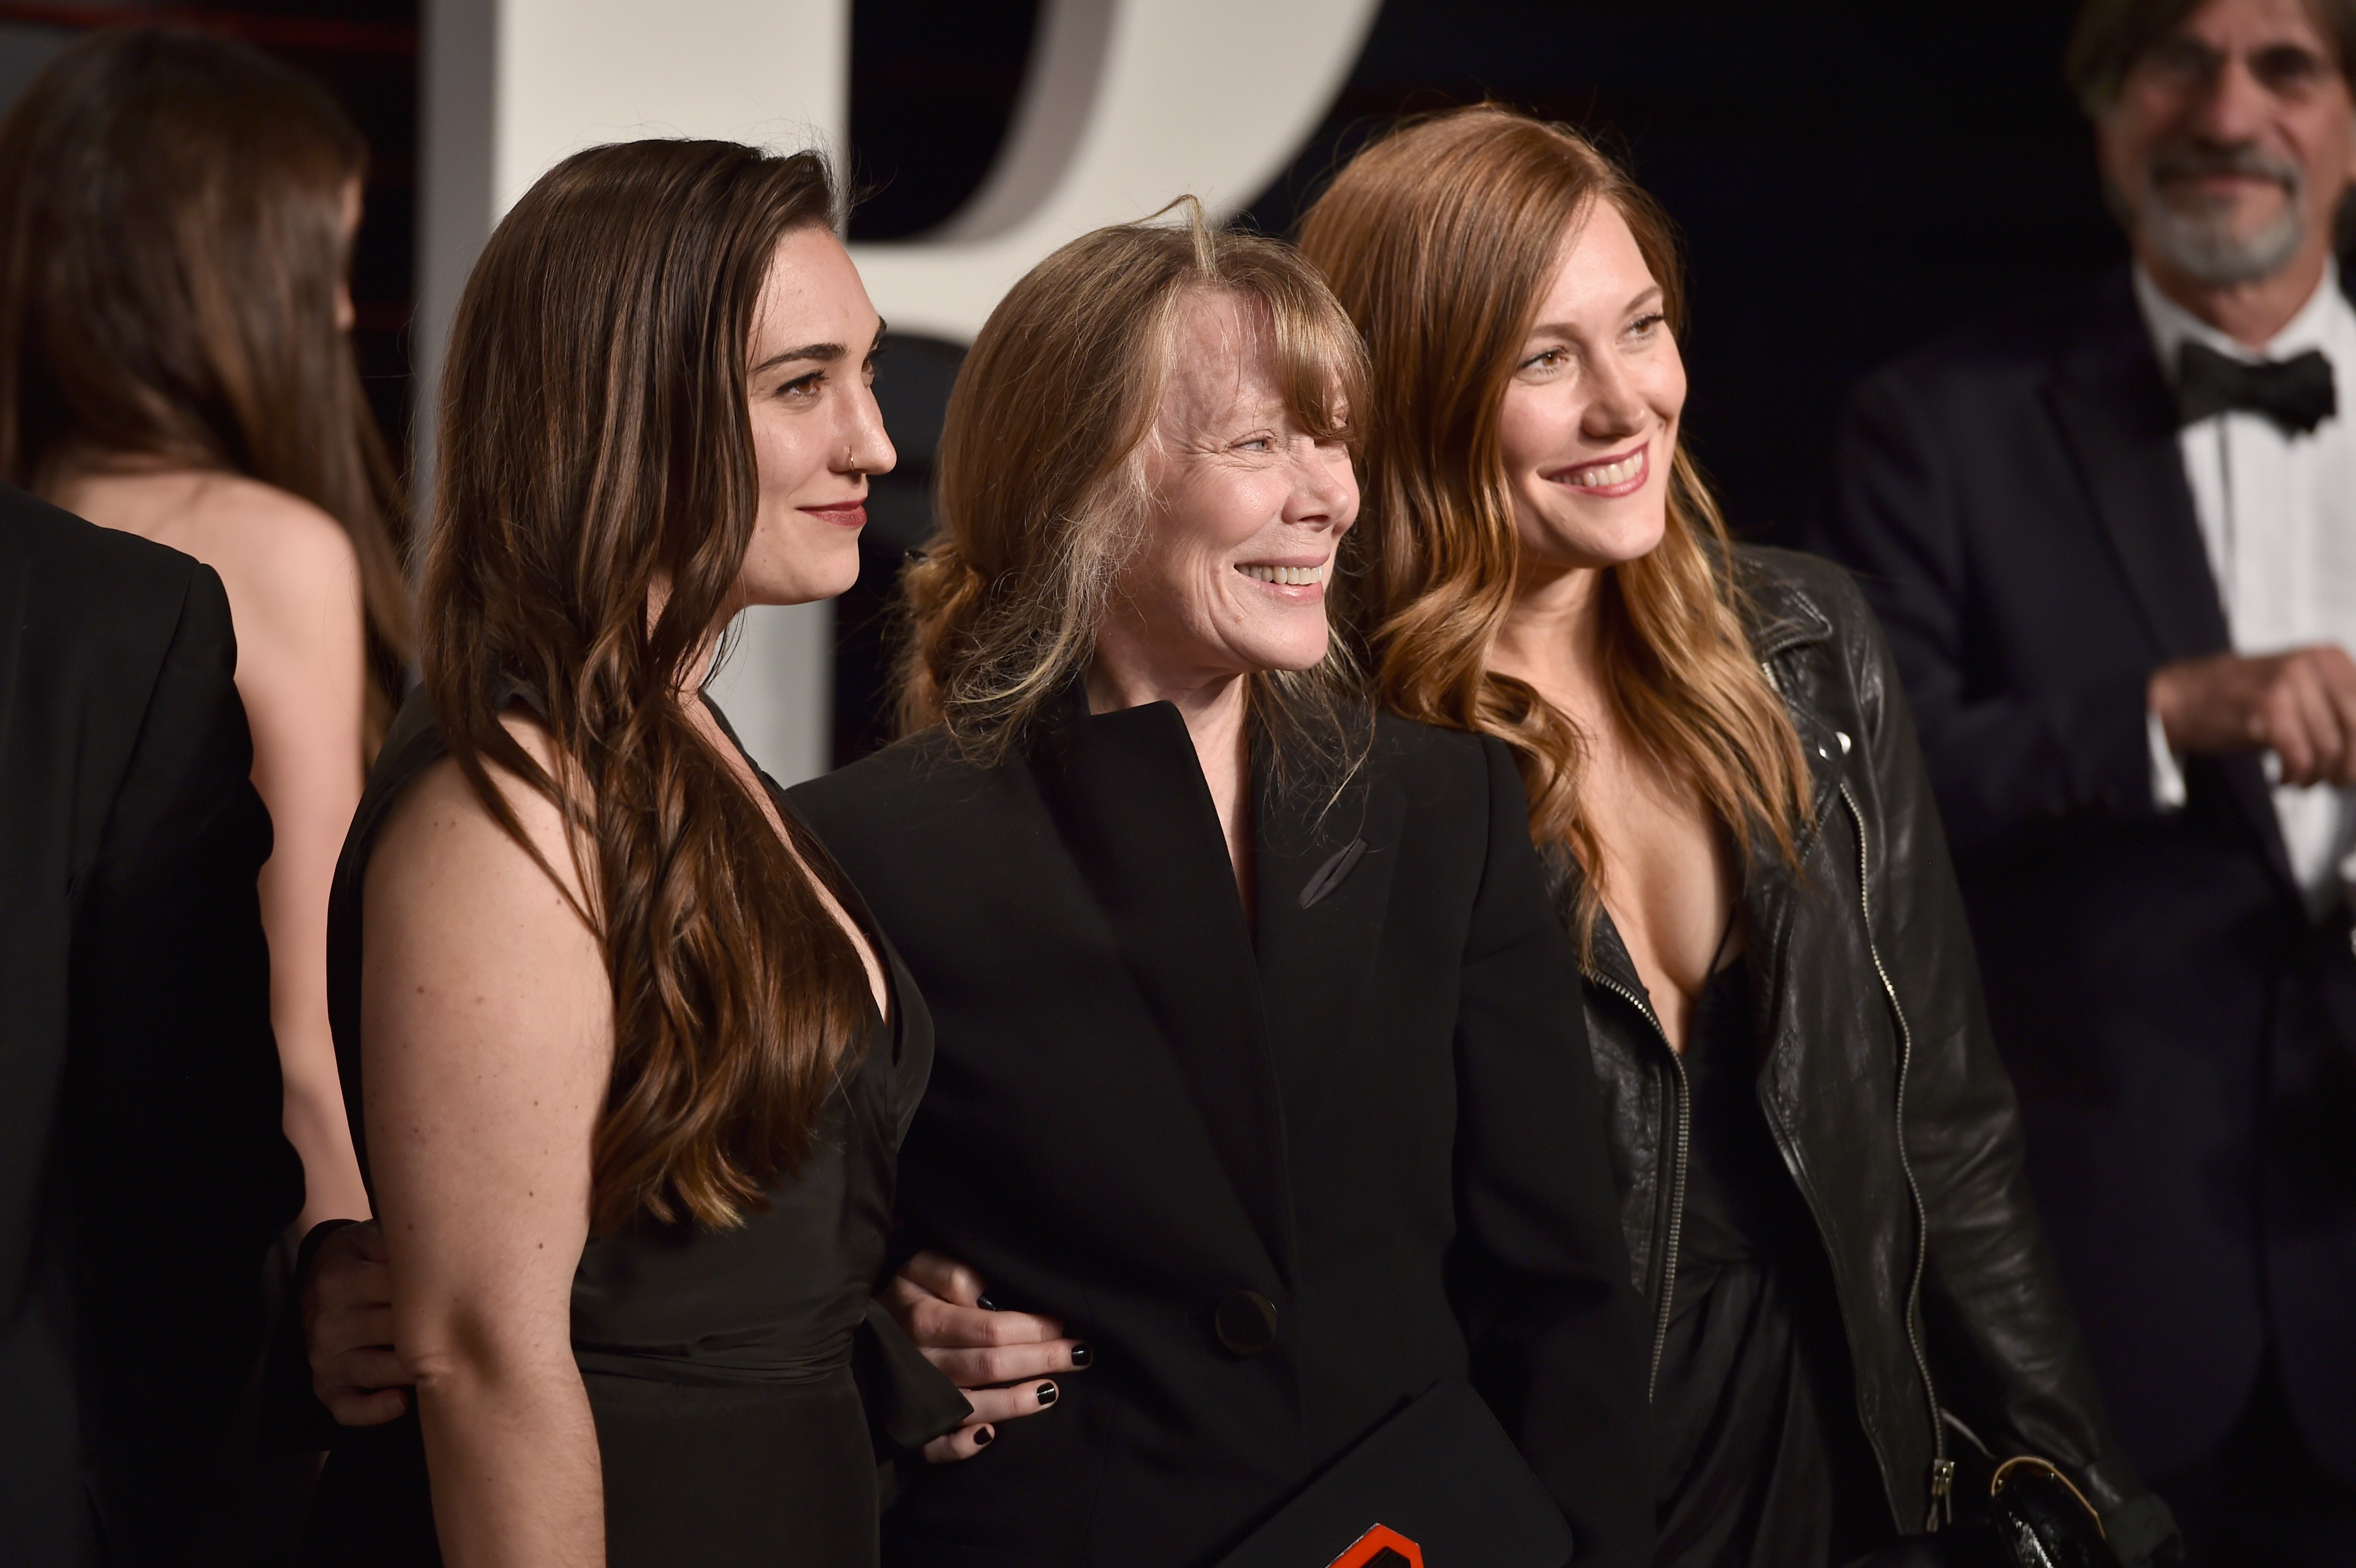 Madison Fisk, Sissy Spacek and Schuyler Fisk attend the 2016 Vanity Fair Oscar Party Hosted By Graydon Carter at the Wallis Annenberg Center for the Performing Arts on February 28, 2016, in Beverly Hills, California. | Source: Getty Images.